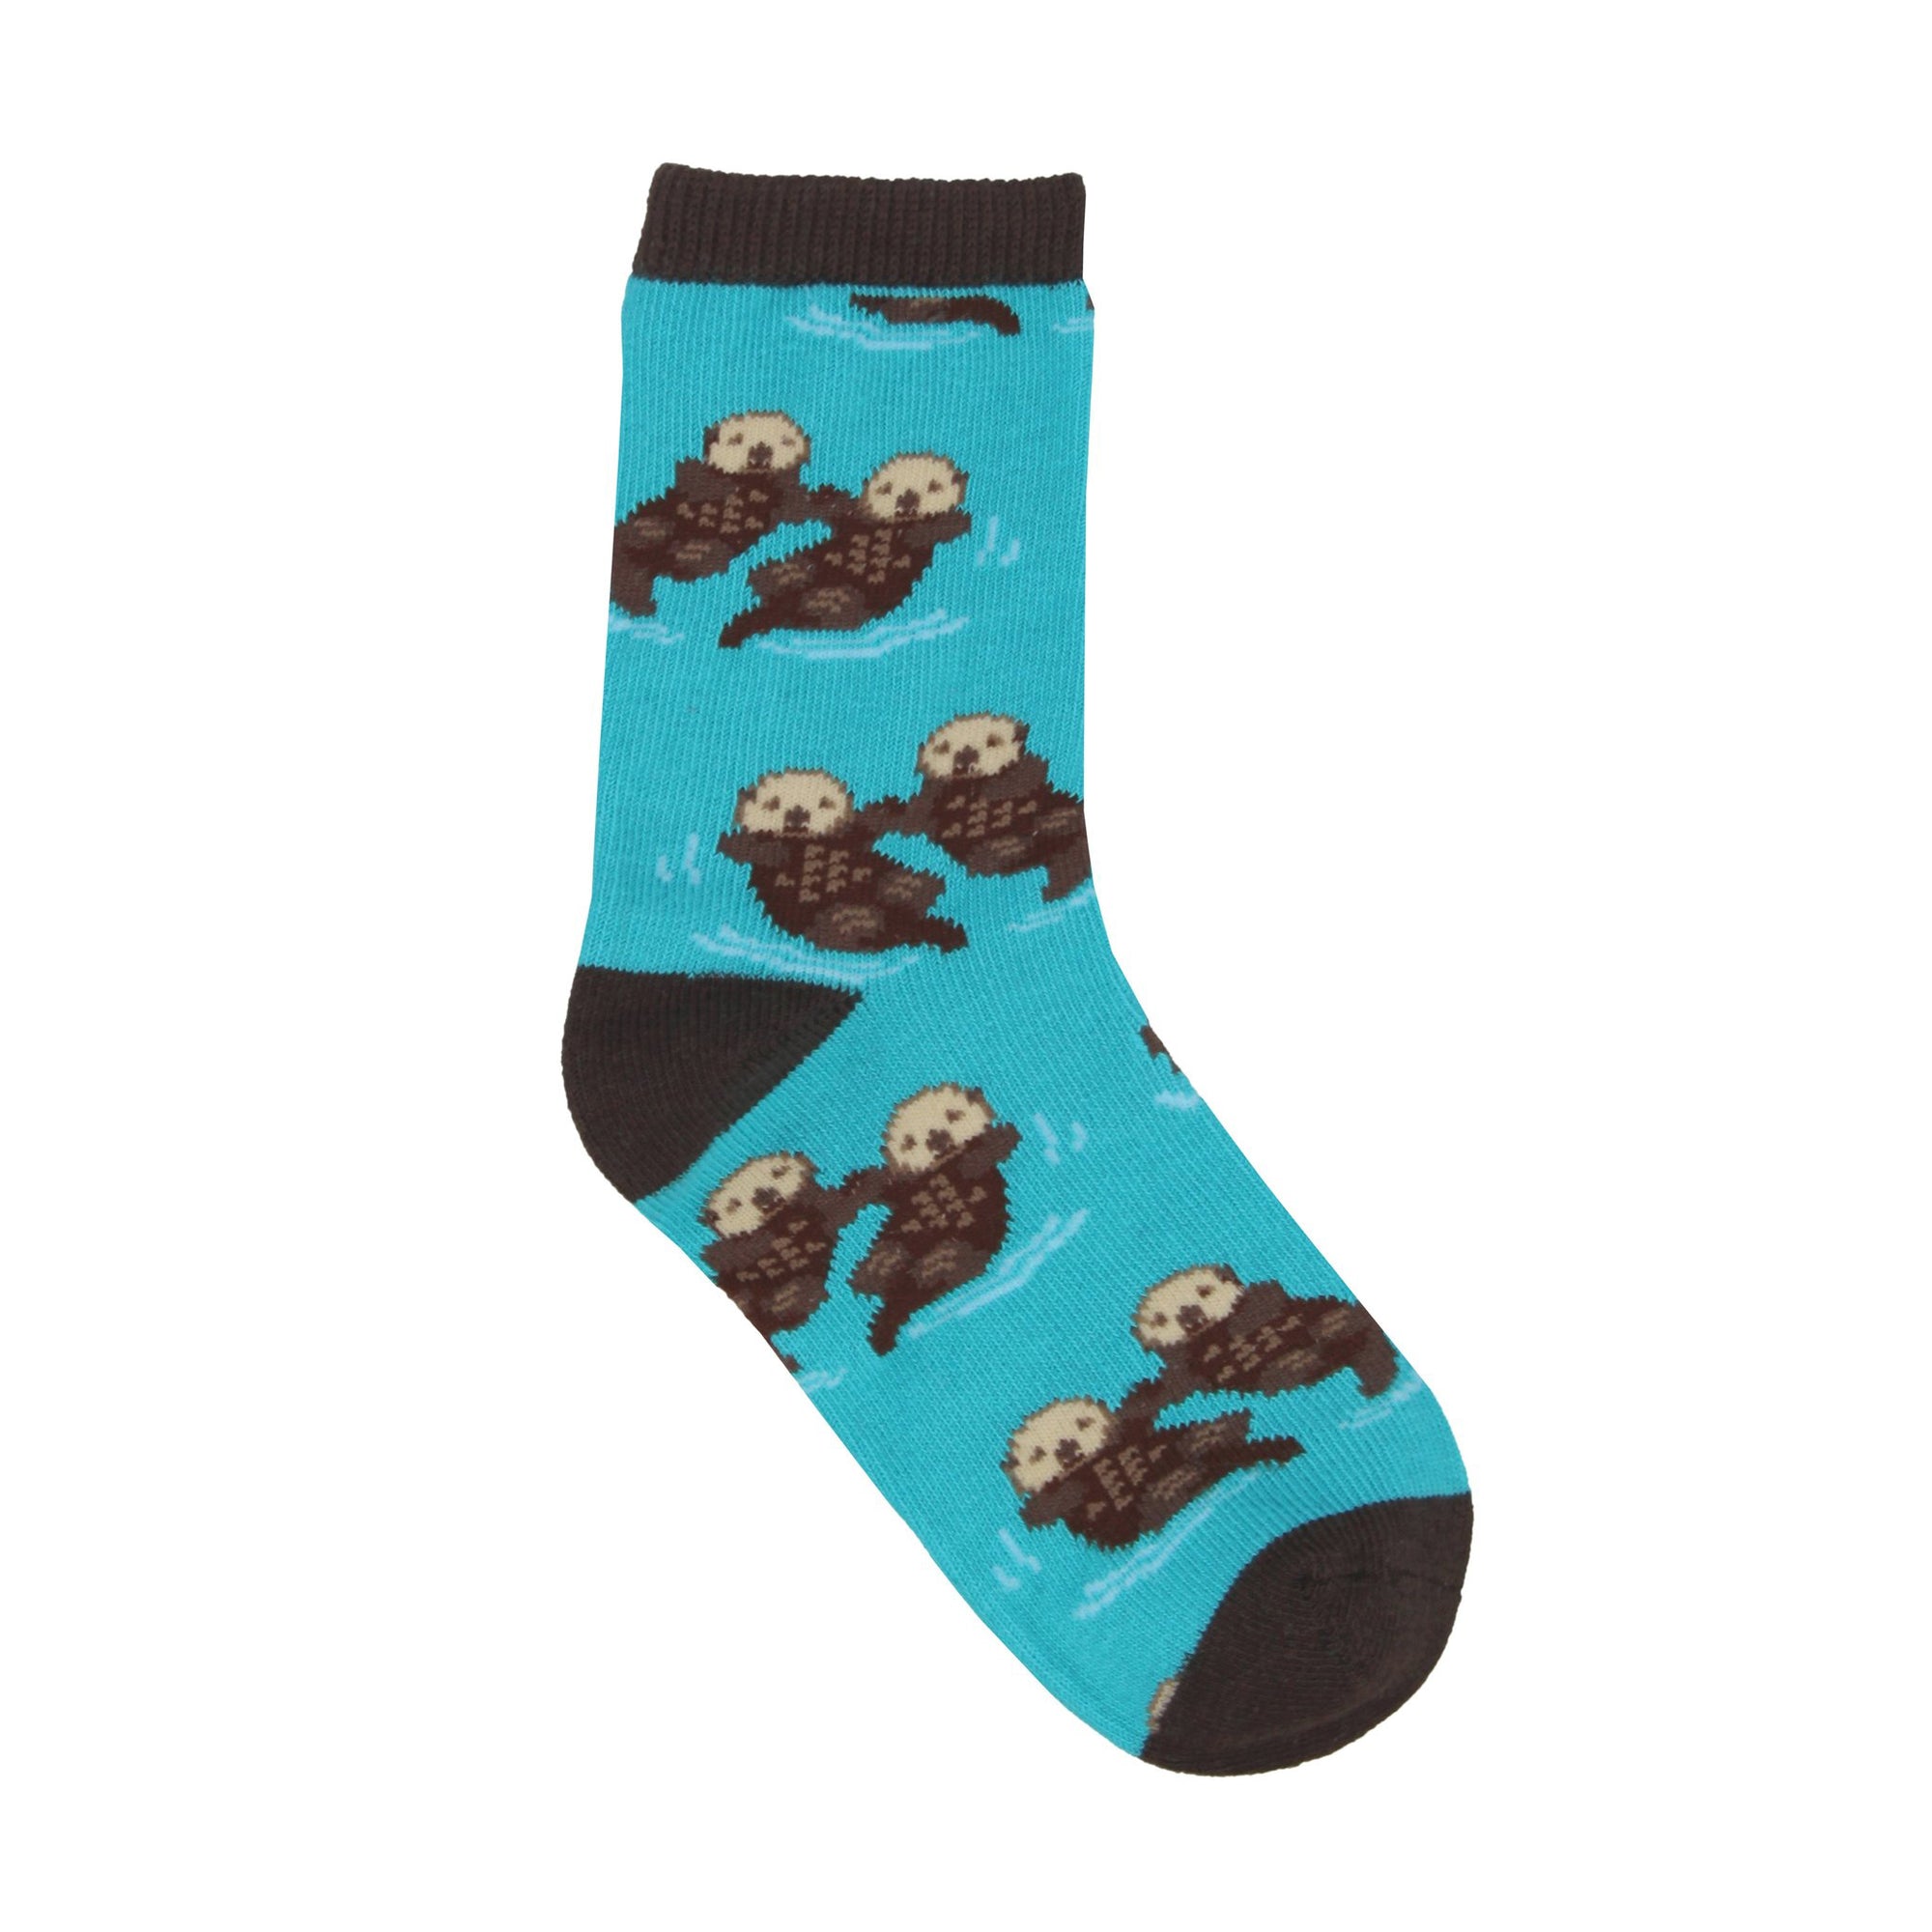 Cute sea otters hold hands on otter socks for kids.